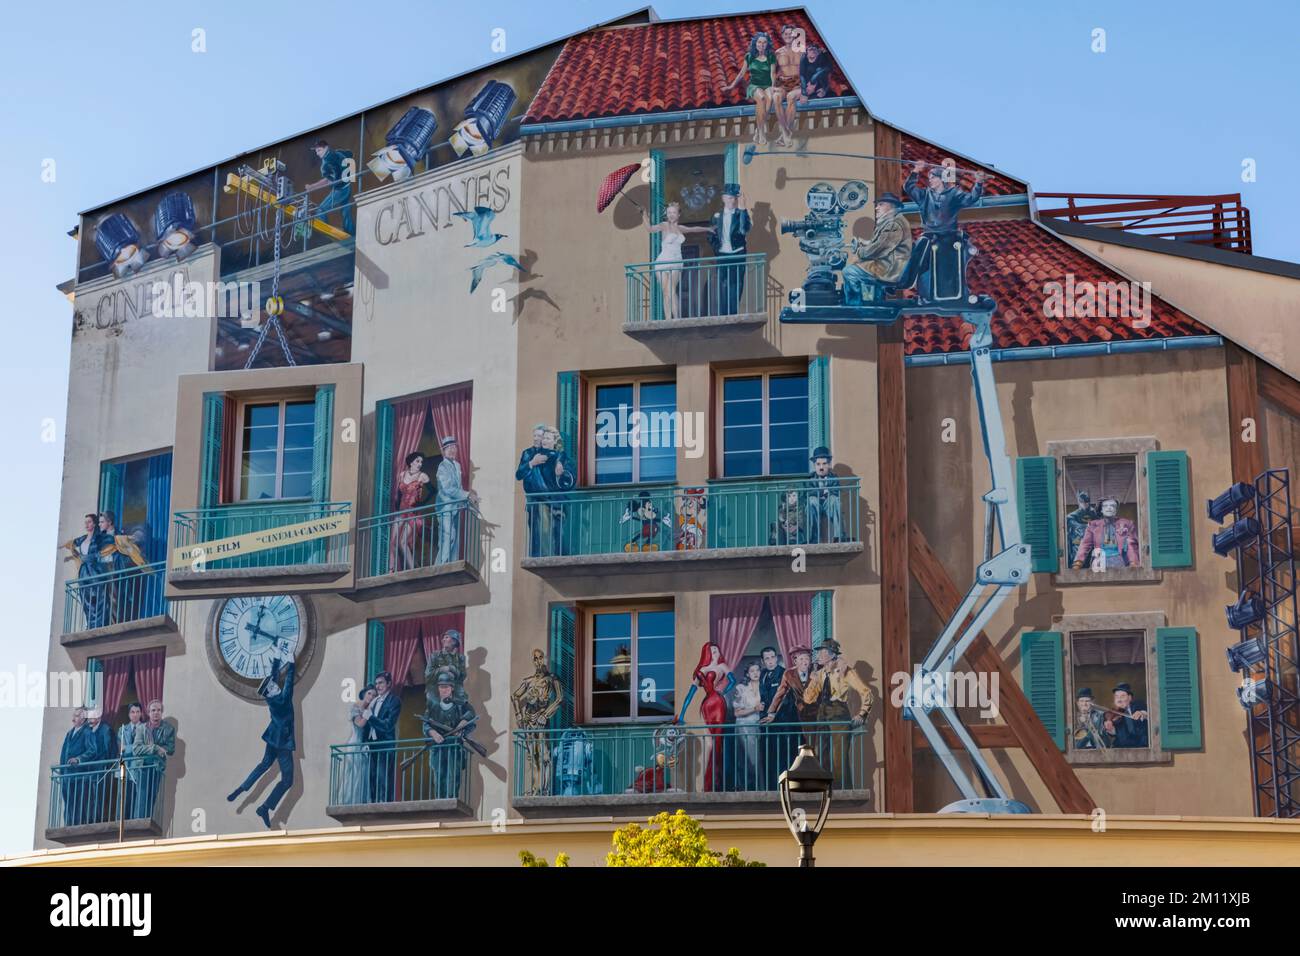 France, French Riviera, Cote d'Azur, Cannes, Le Suquet Area, Mural depicting Scenes from Famous Movies Stock Photo